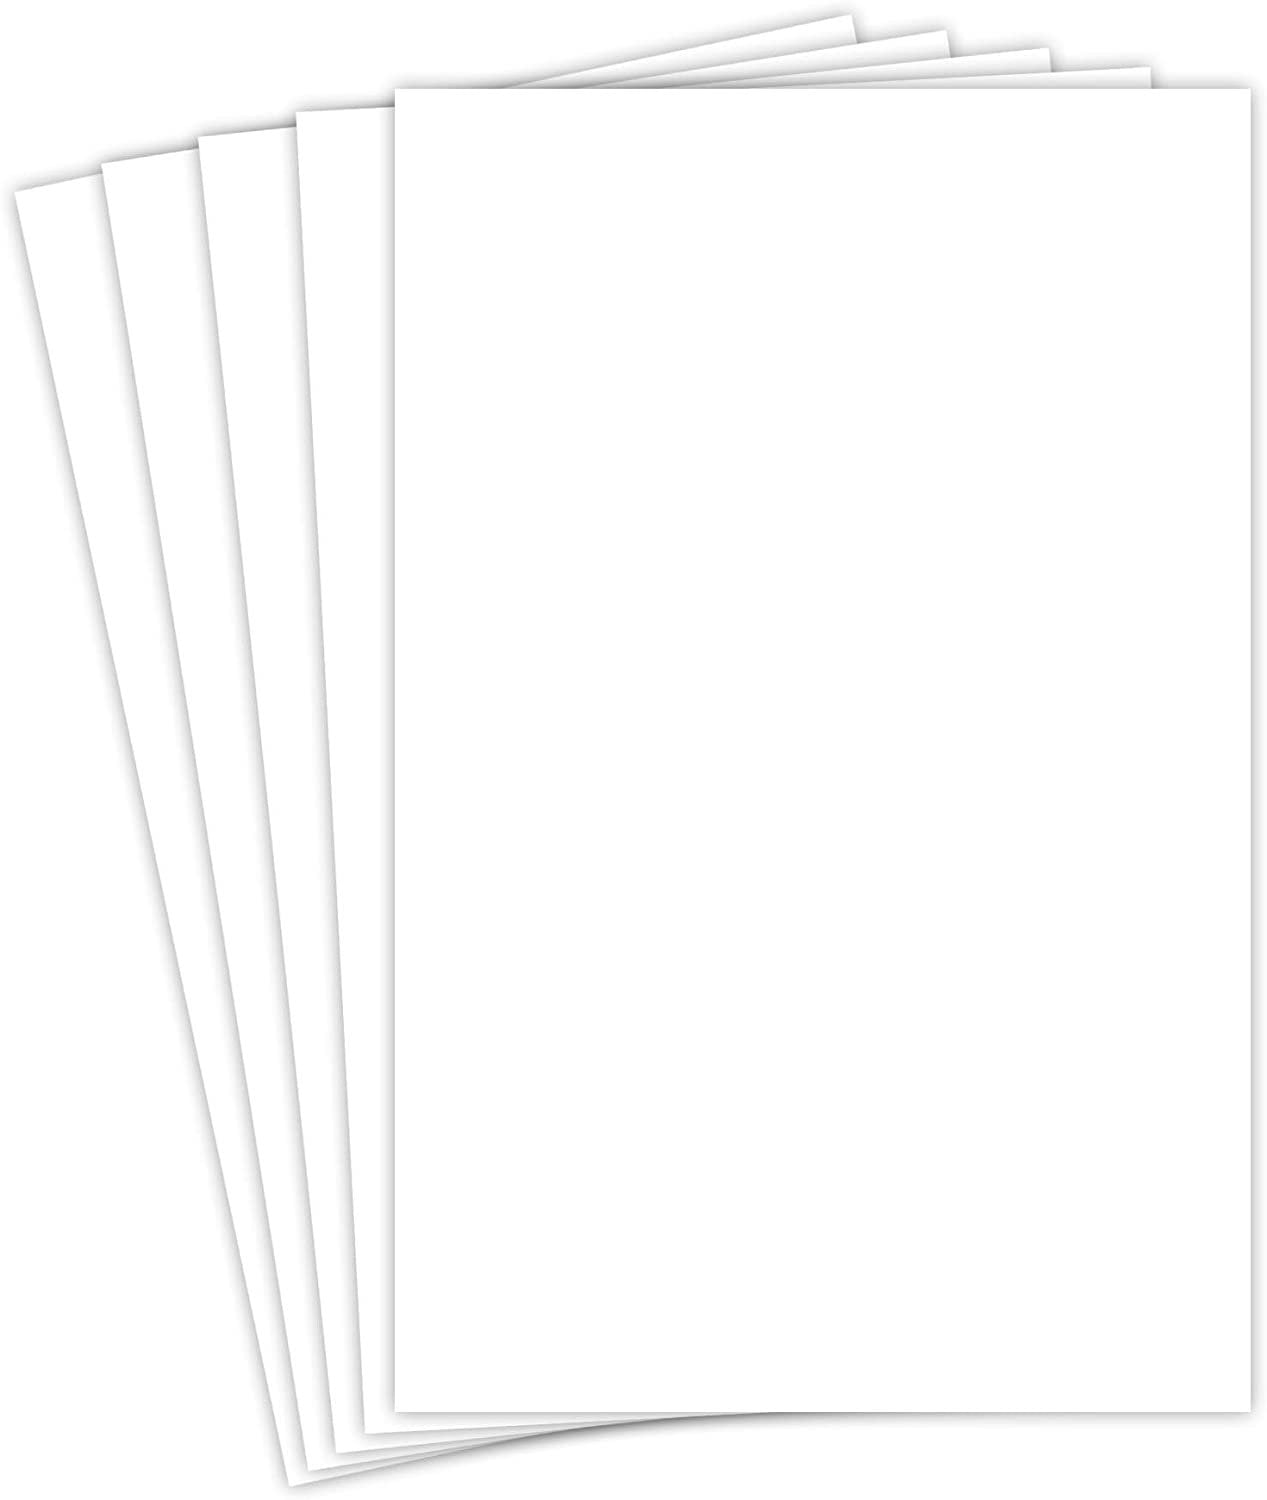 White Cardstock - 67 Lb, 100 Sheets Per Pack. 11 x 17 Inches 